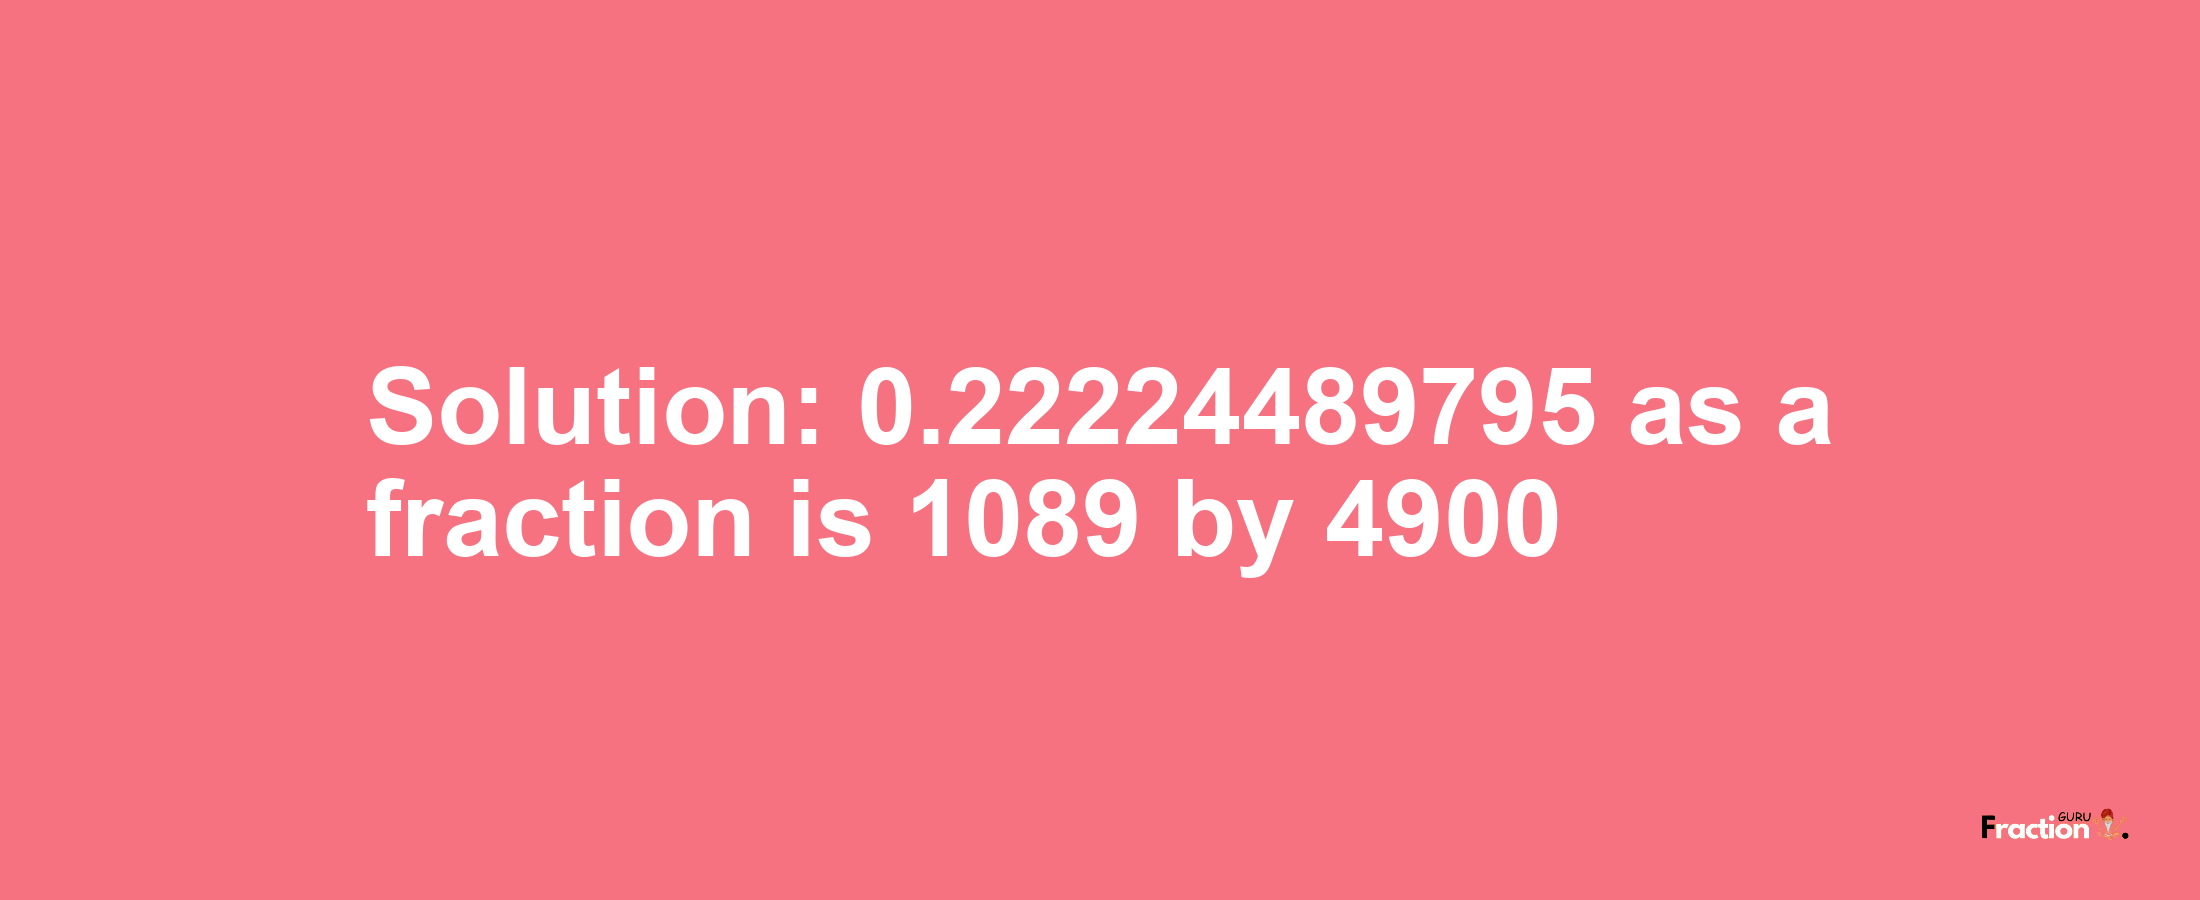 Solution:0.22224489795 as a fraction is 1089/4900